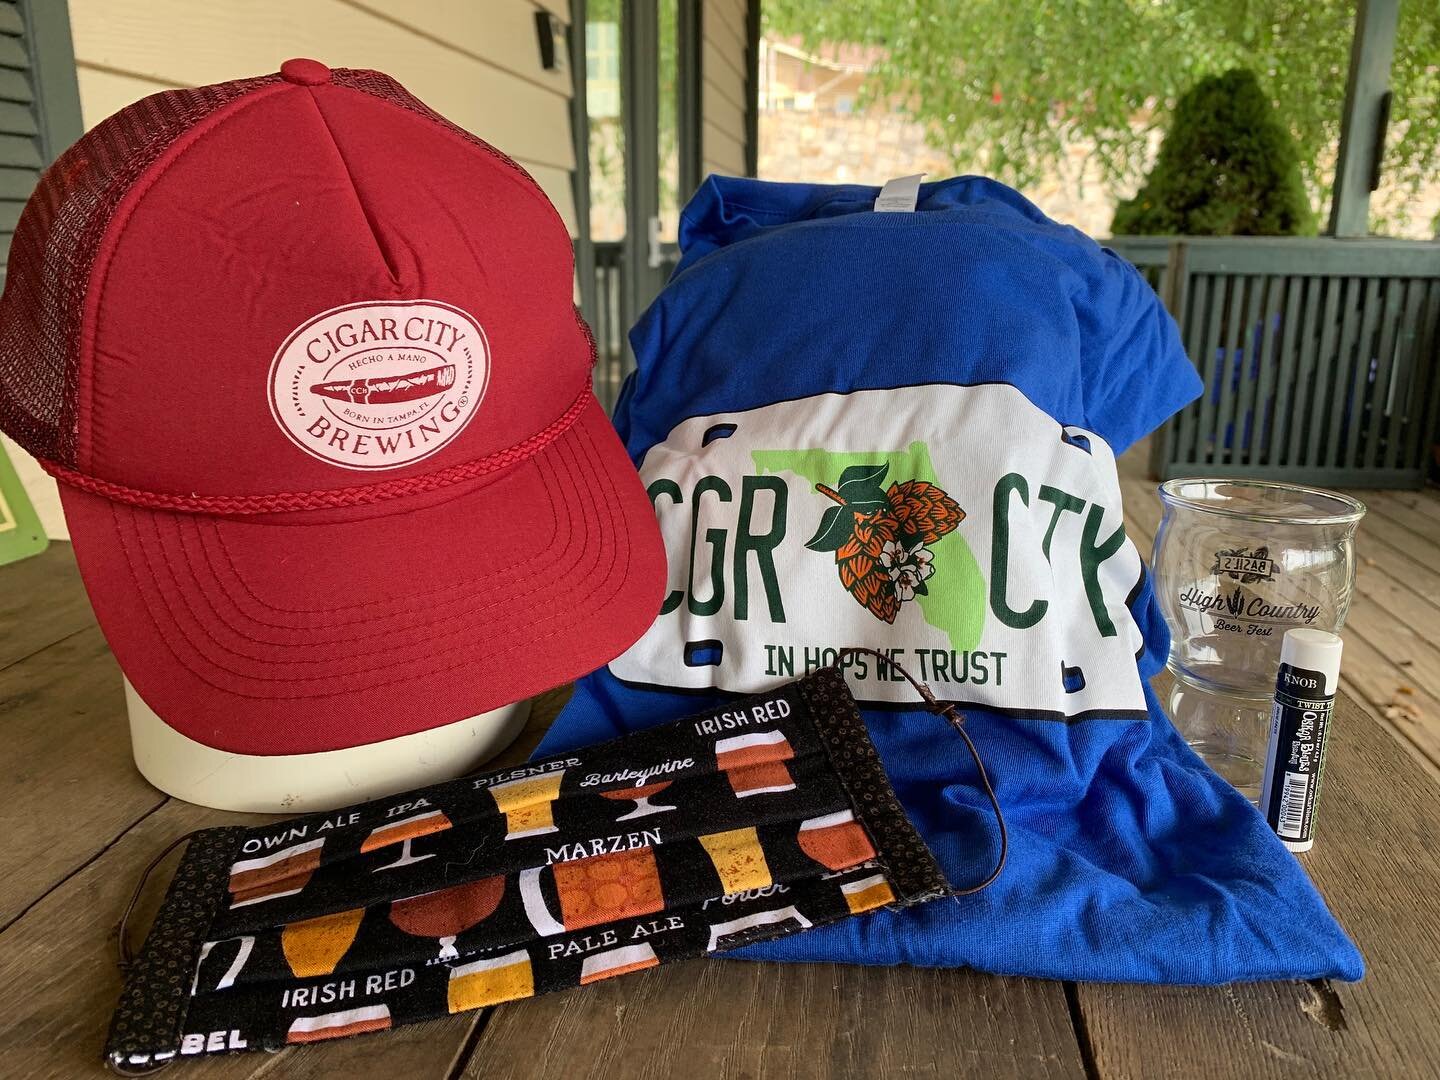 Virtual Beer Fest is LIVE!! Sneak peak at some of our incredible prizes in the GIVE &amp; GET 21+ raffle donation... There is still time to head to the High Country Beer Fest website and enter! #hcbeerfest #virtualbeerfest #boonenc #donatenow #drinkl